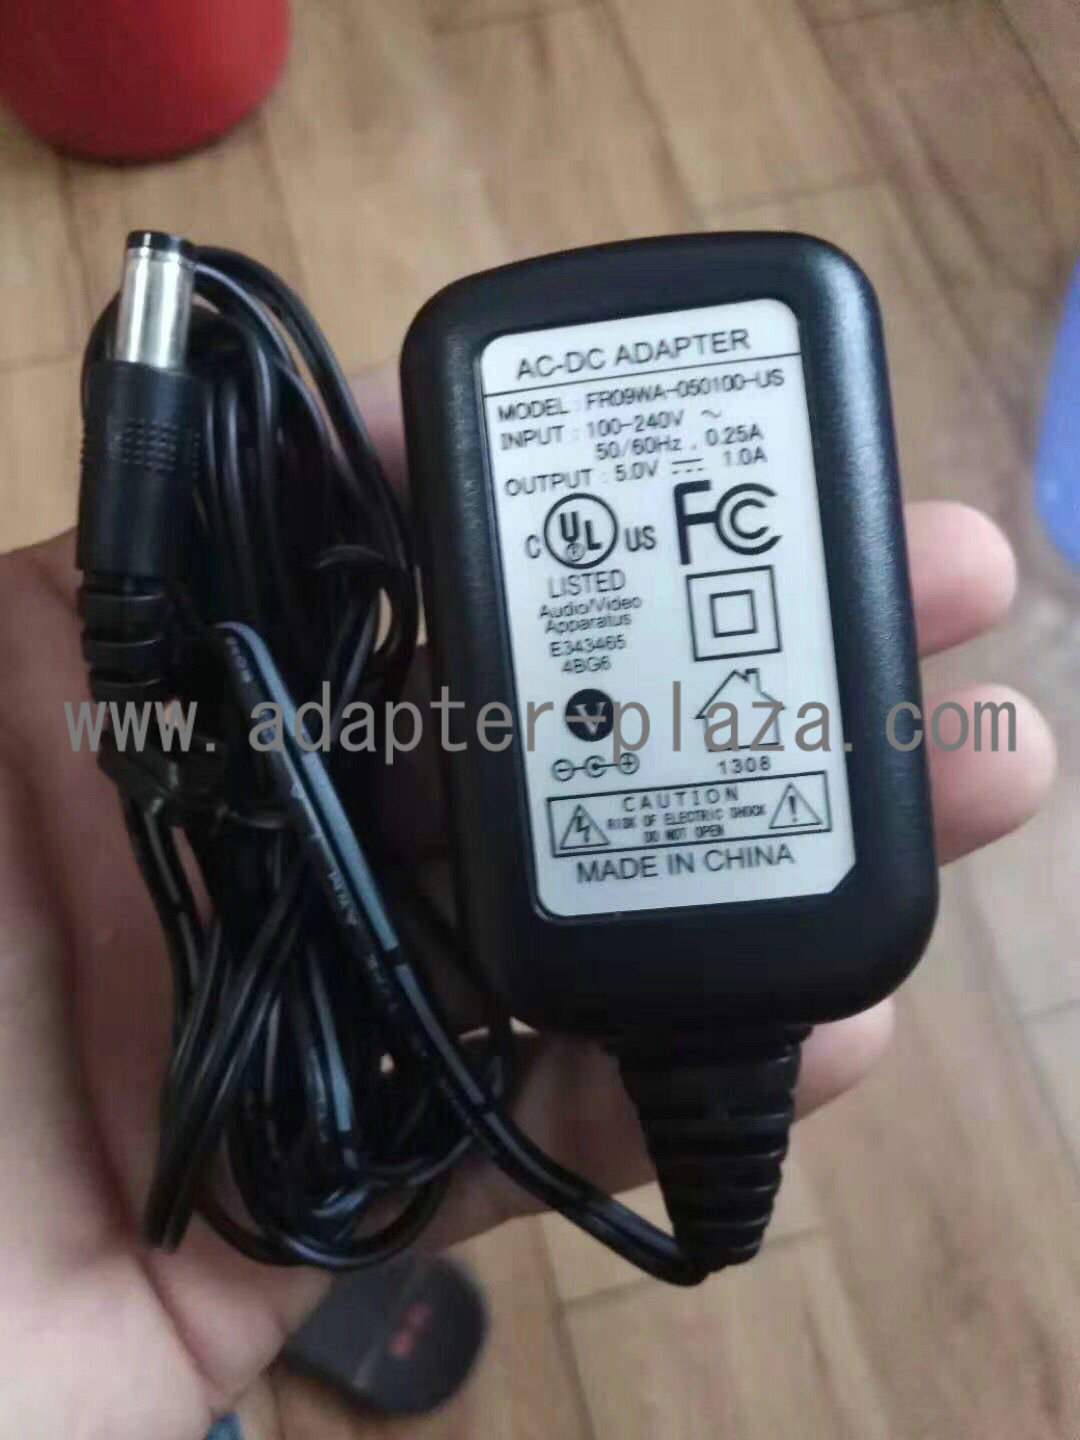 *Brand NEW* FR09WA-050100-US 5.0V 1.0A AC DC Adapter POWER SUPPLY - Click Image to Close